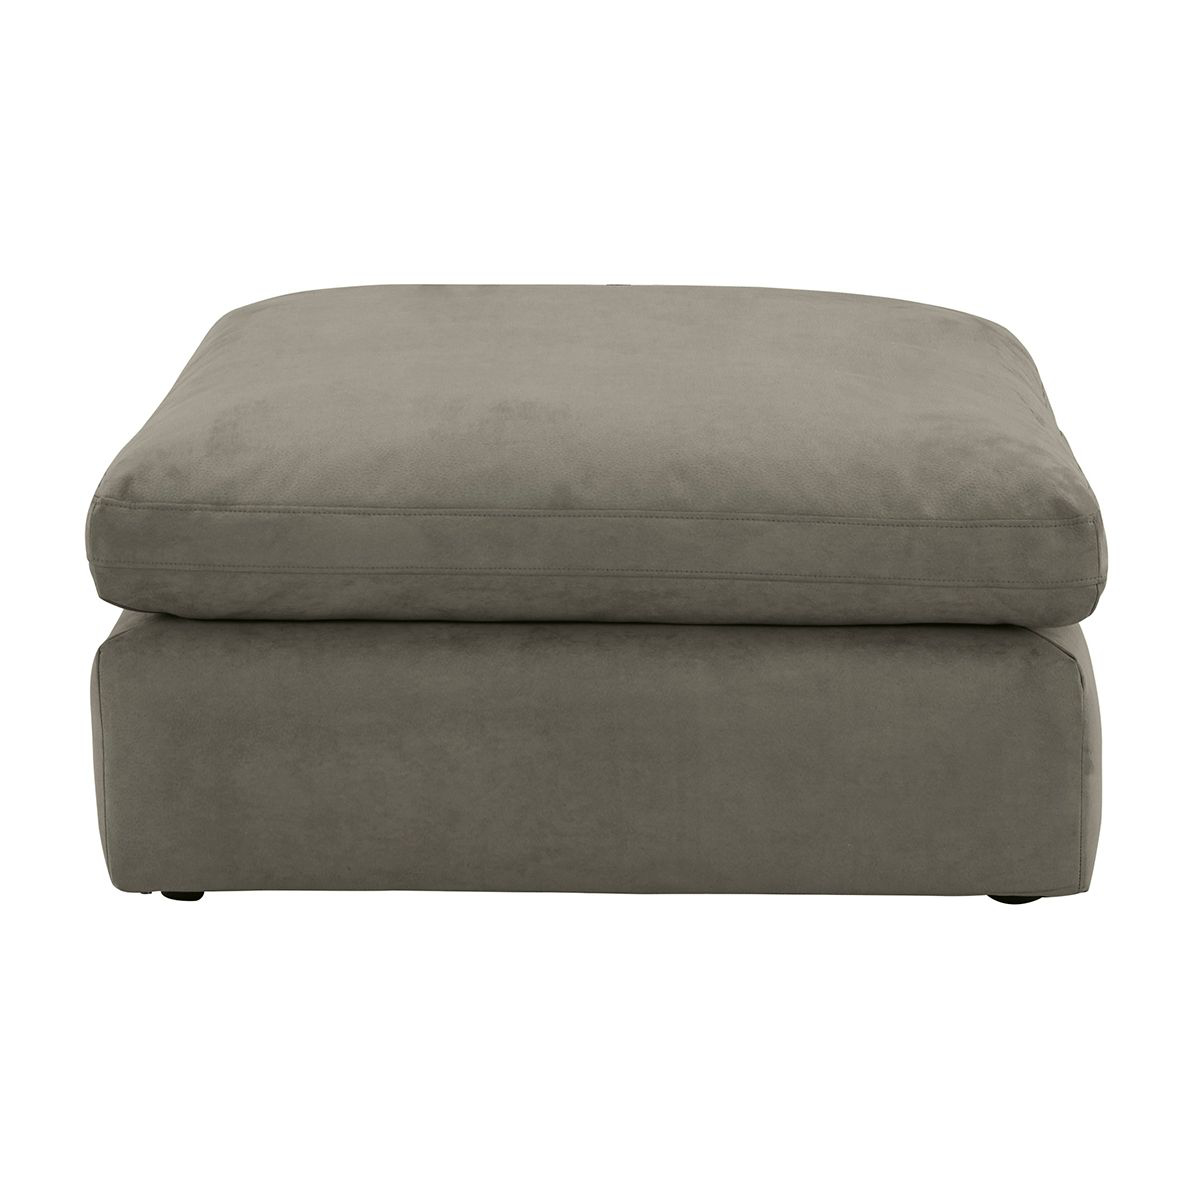 Picture of CHICAGO ACCENT OTTOMAN